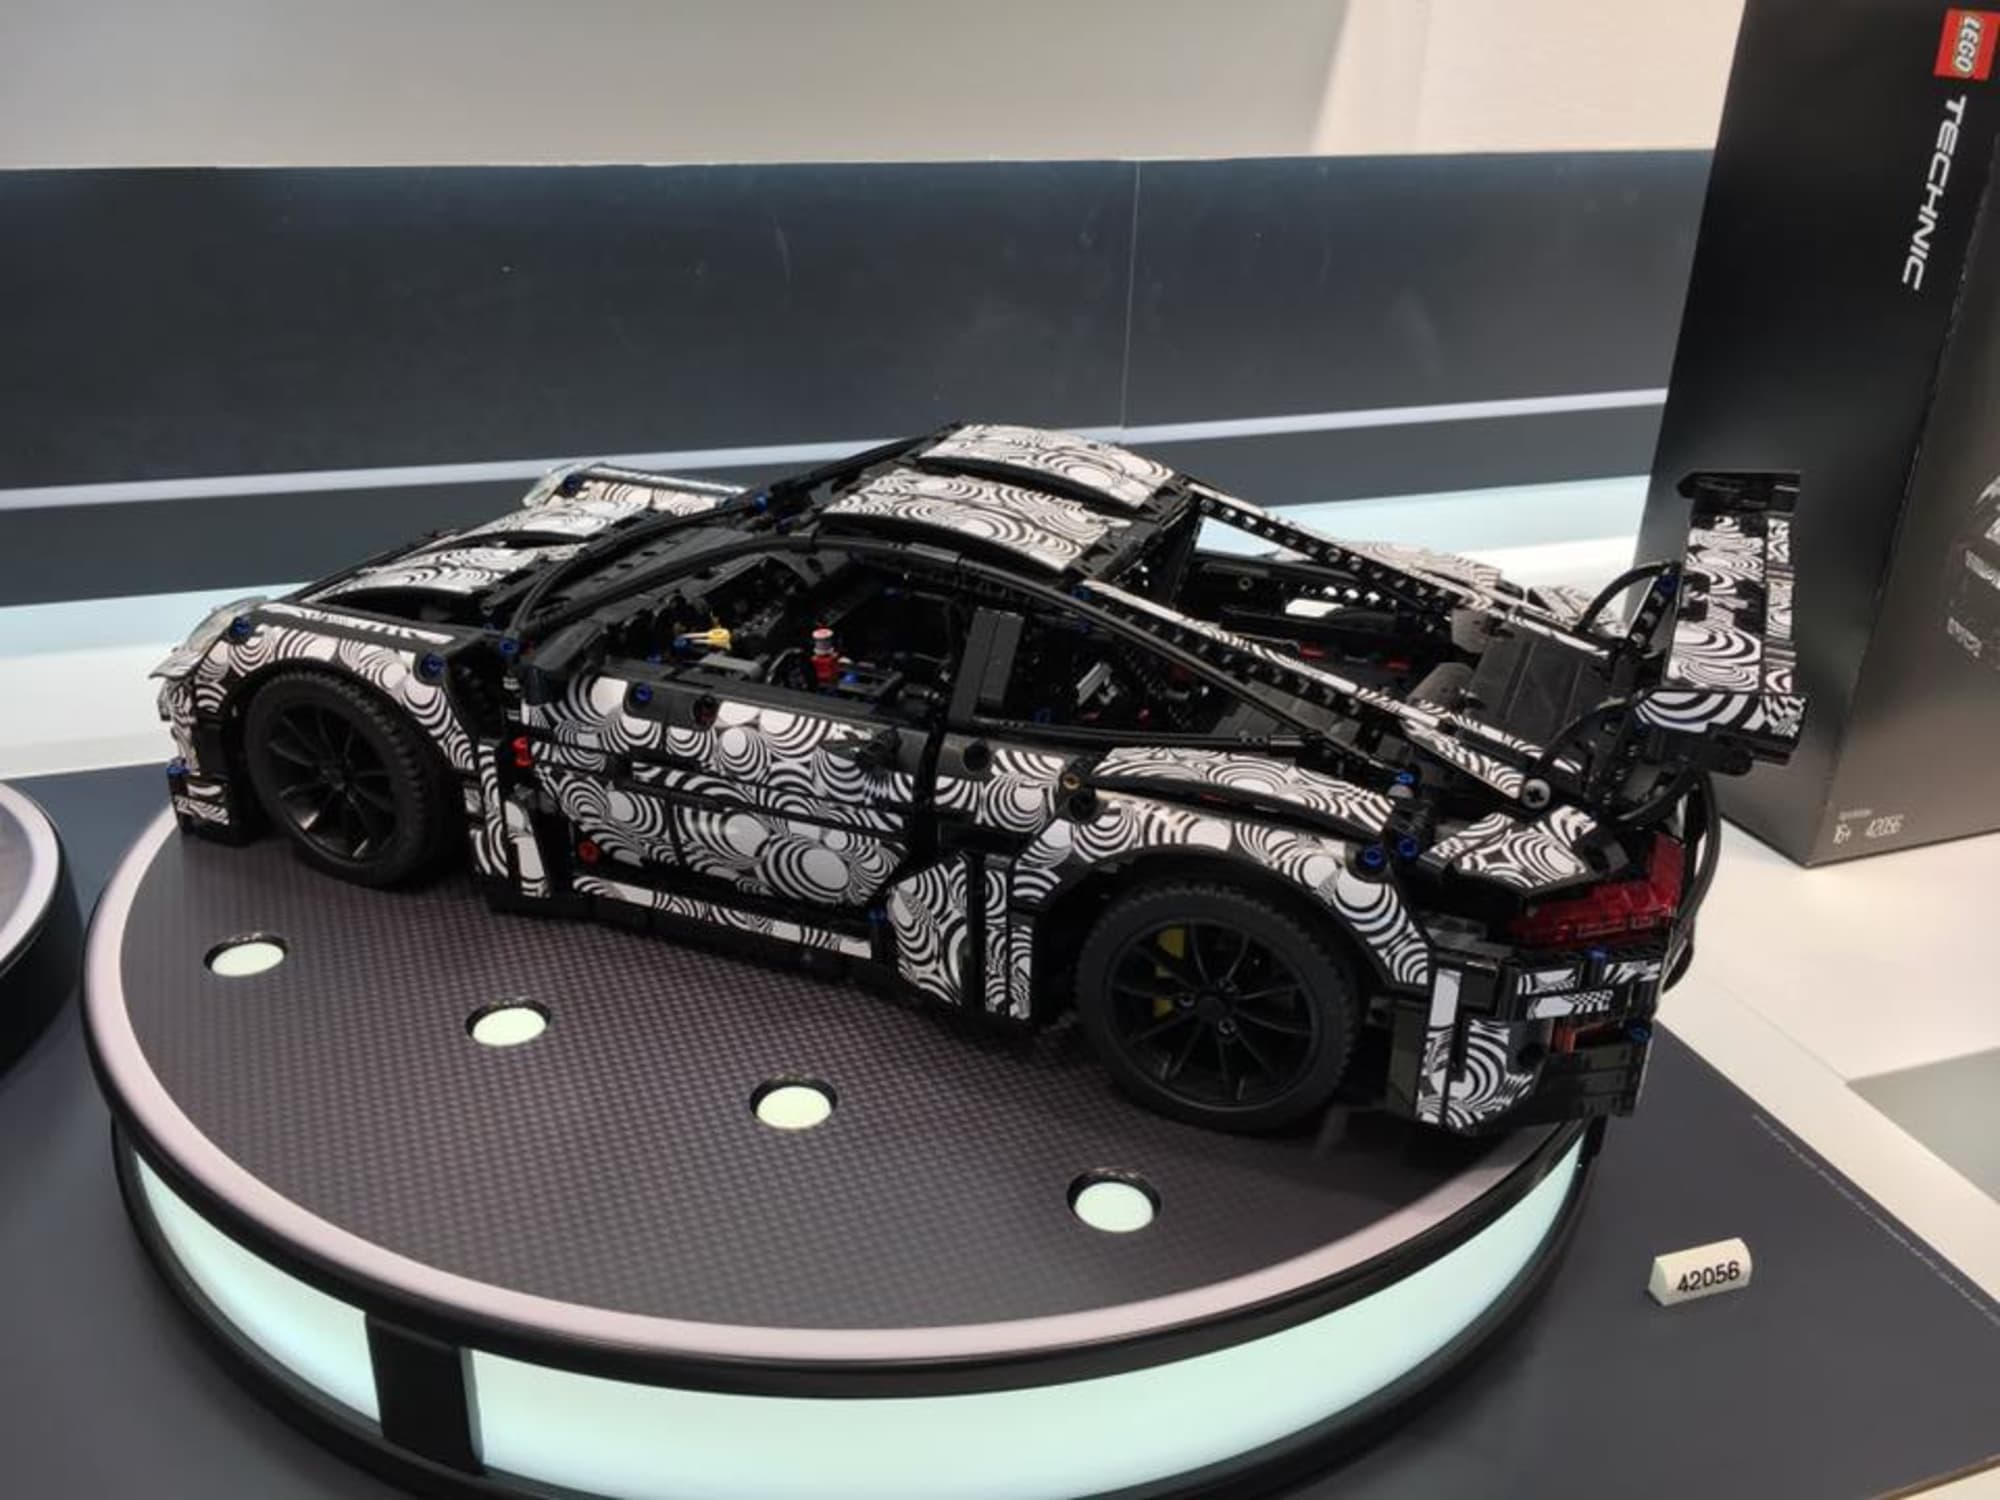 Lego: 911 GT3 RS Available For Technic